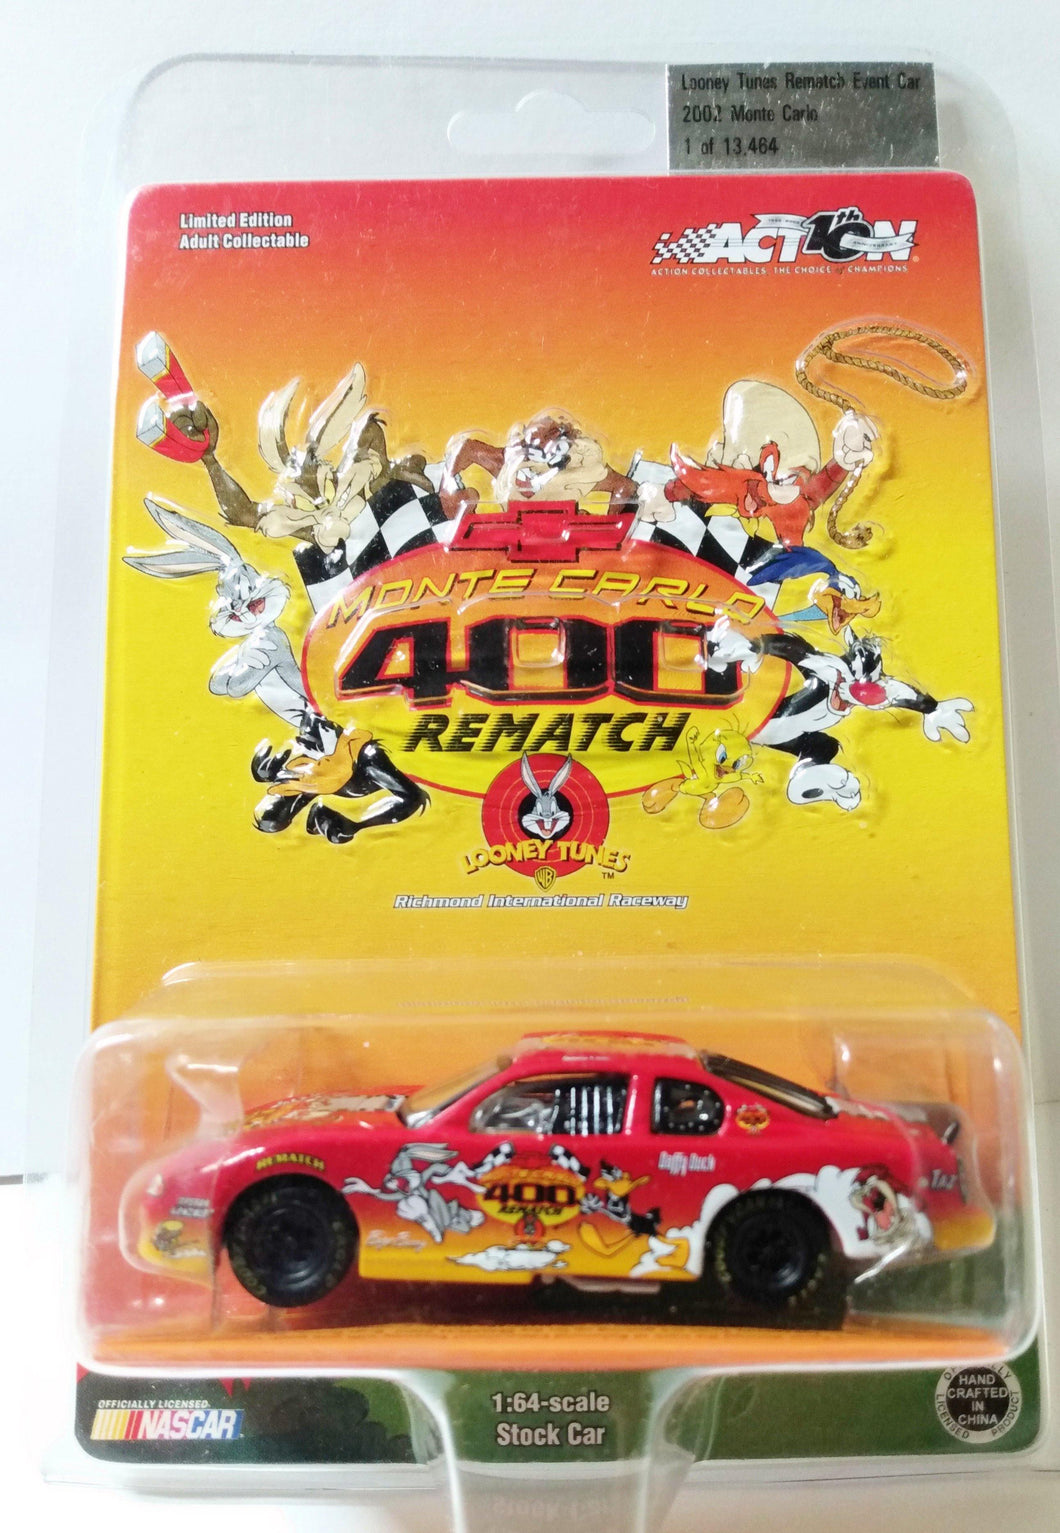 Action Racing 2002 Looney Tunes Rematch Event Car Monte Carlo - TulipStuff